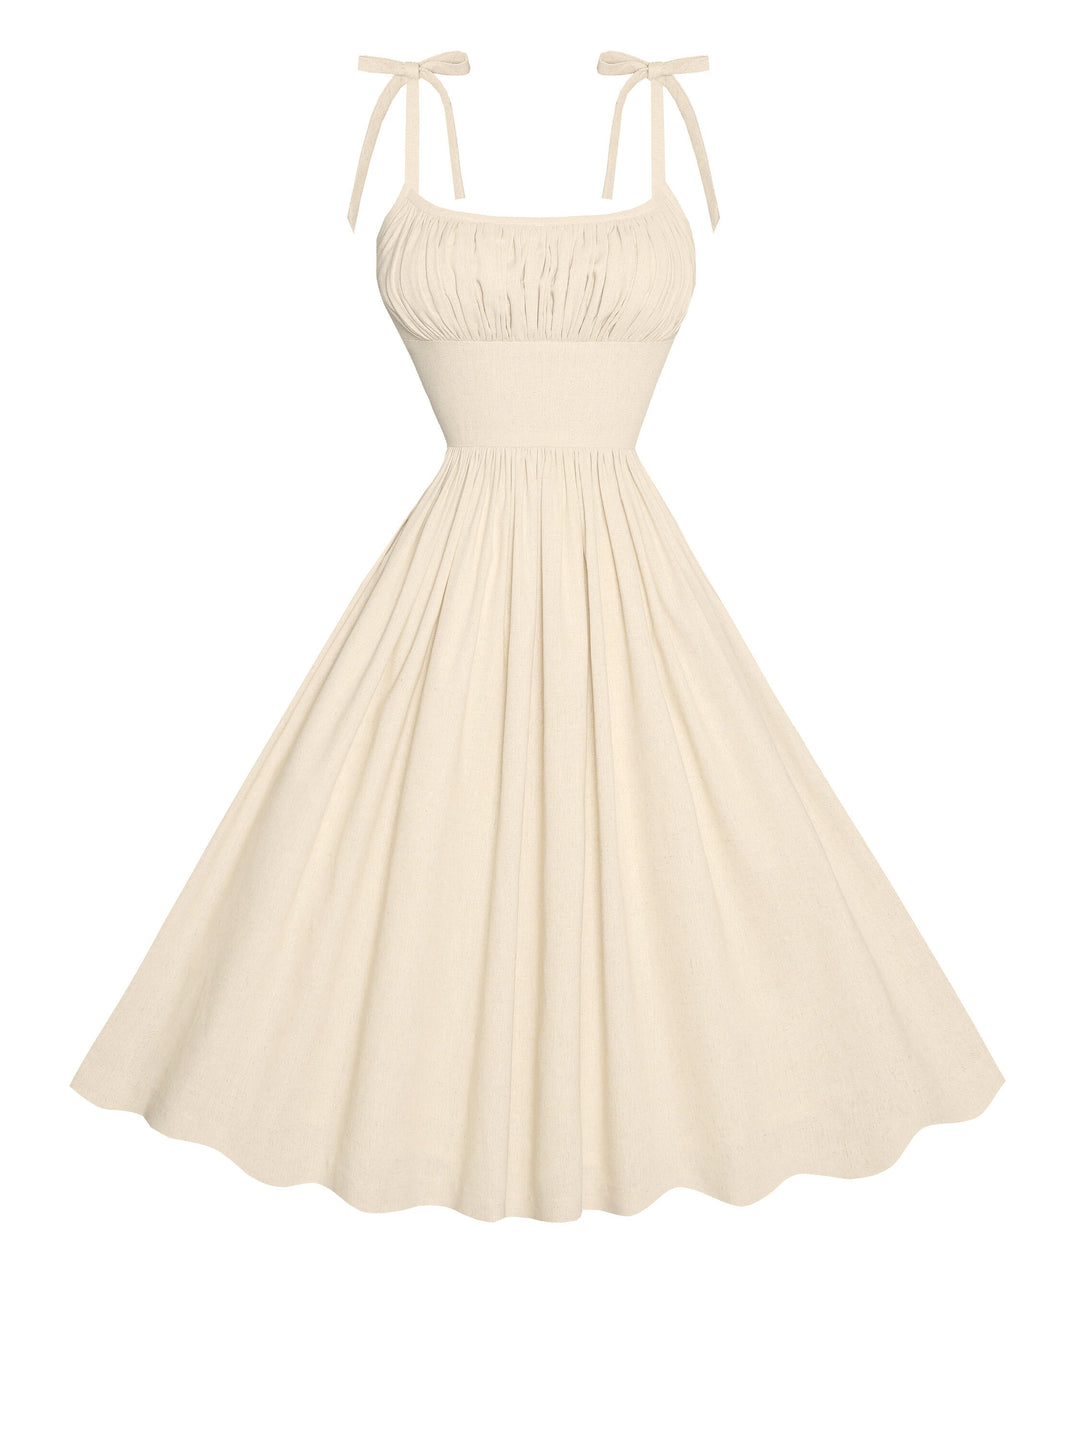 MTO - Kelly Dress in Parchment Ivory Linen